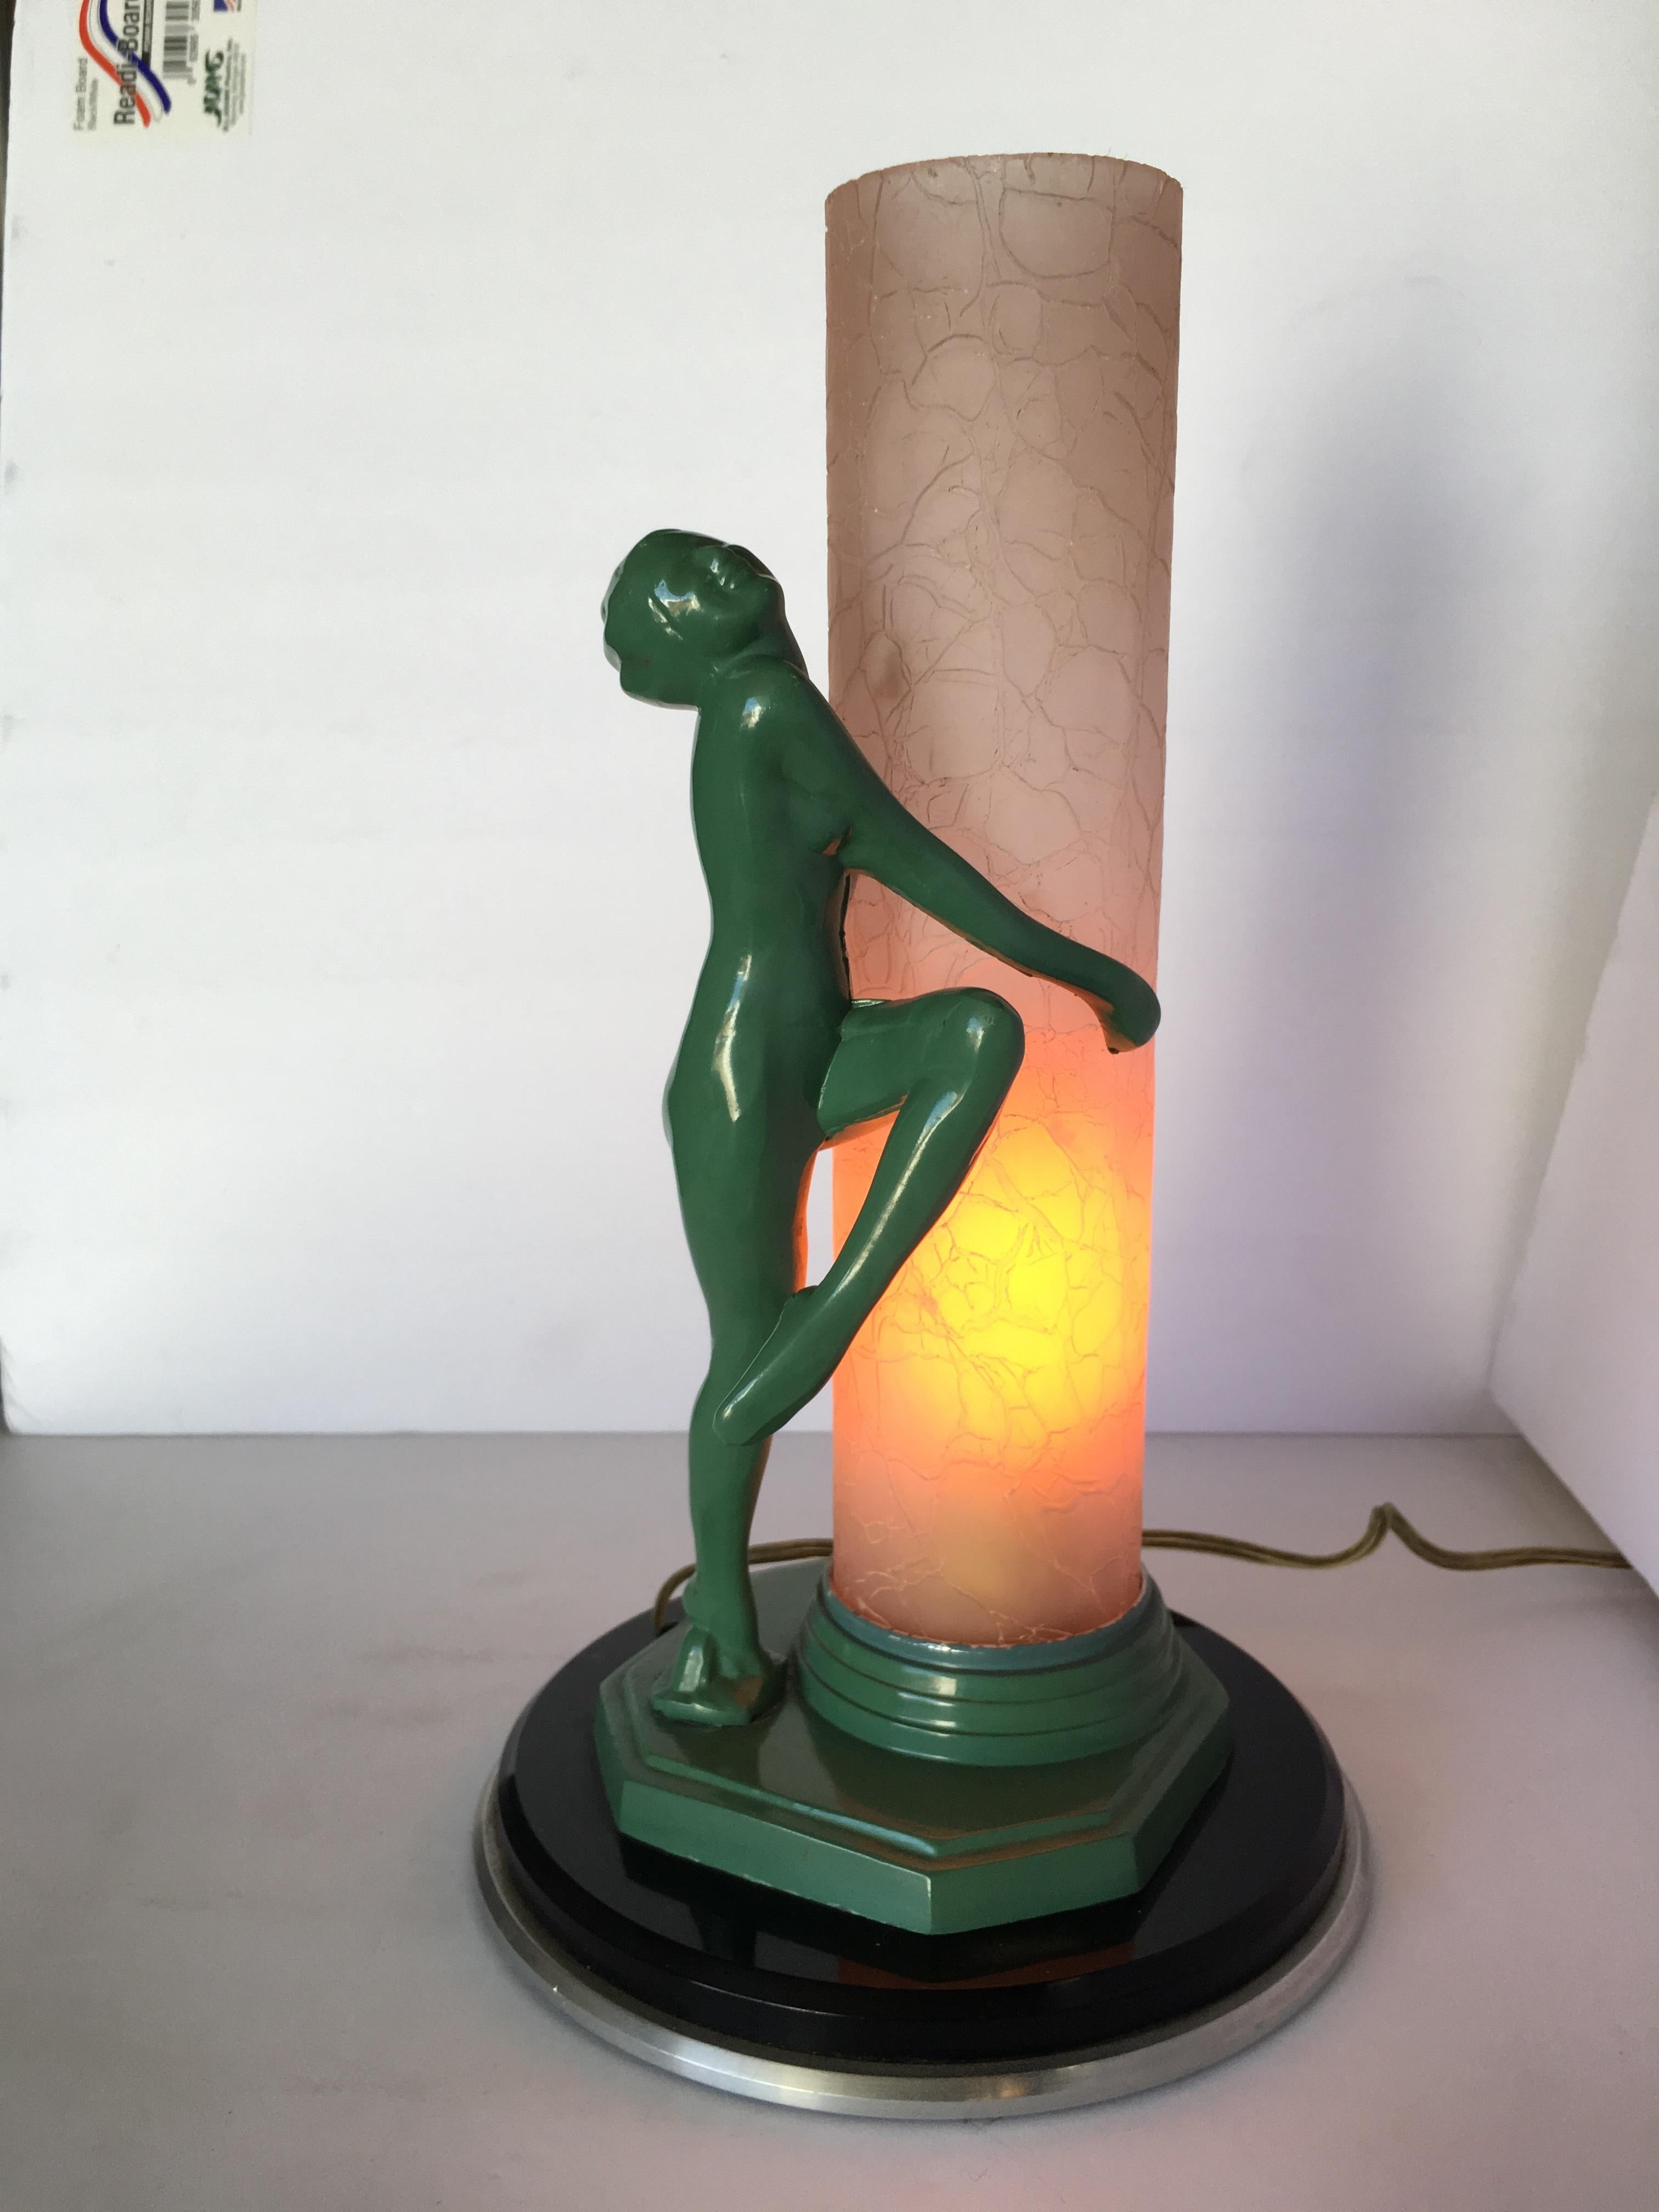 Re-edition of the Frankart F612 lamp with a pink glass shade featuring a nude flapper dancer.